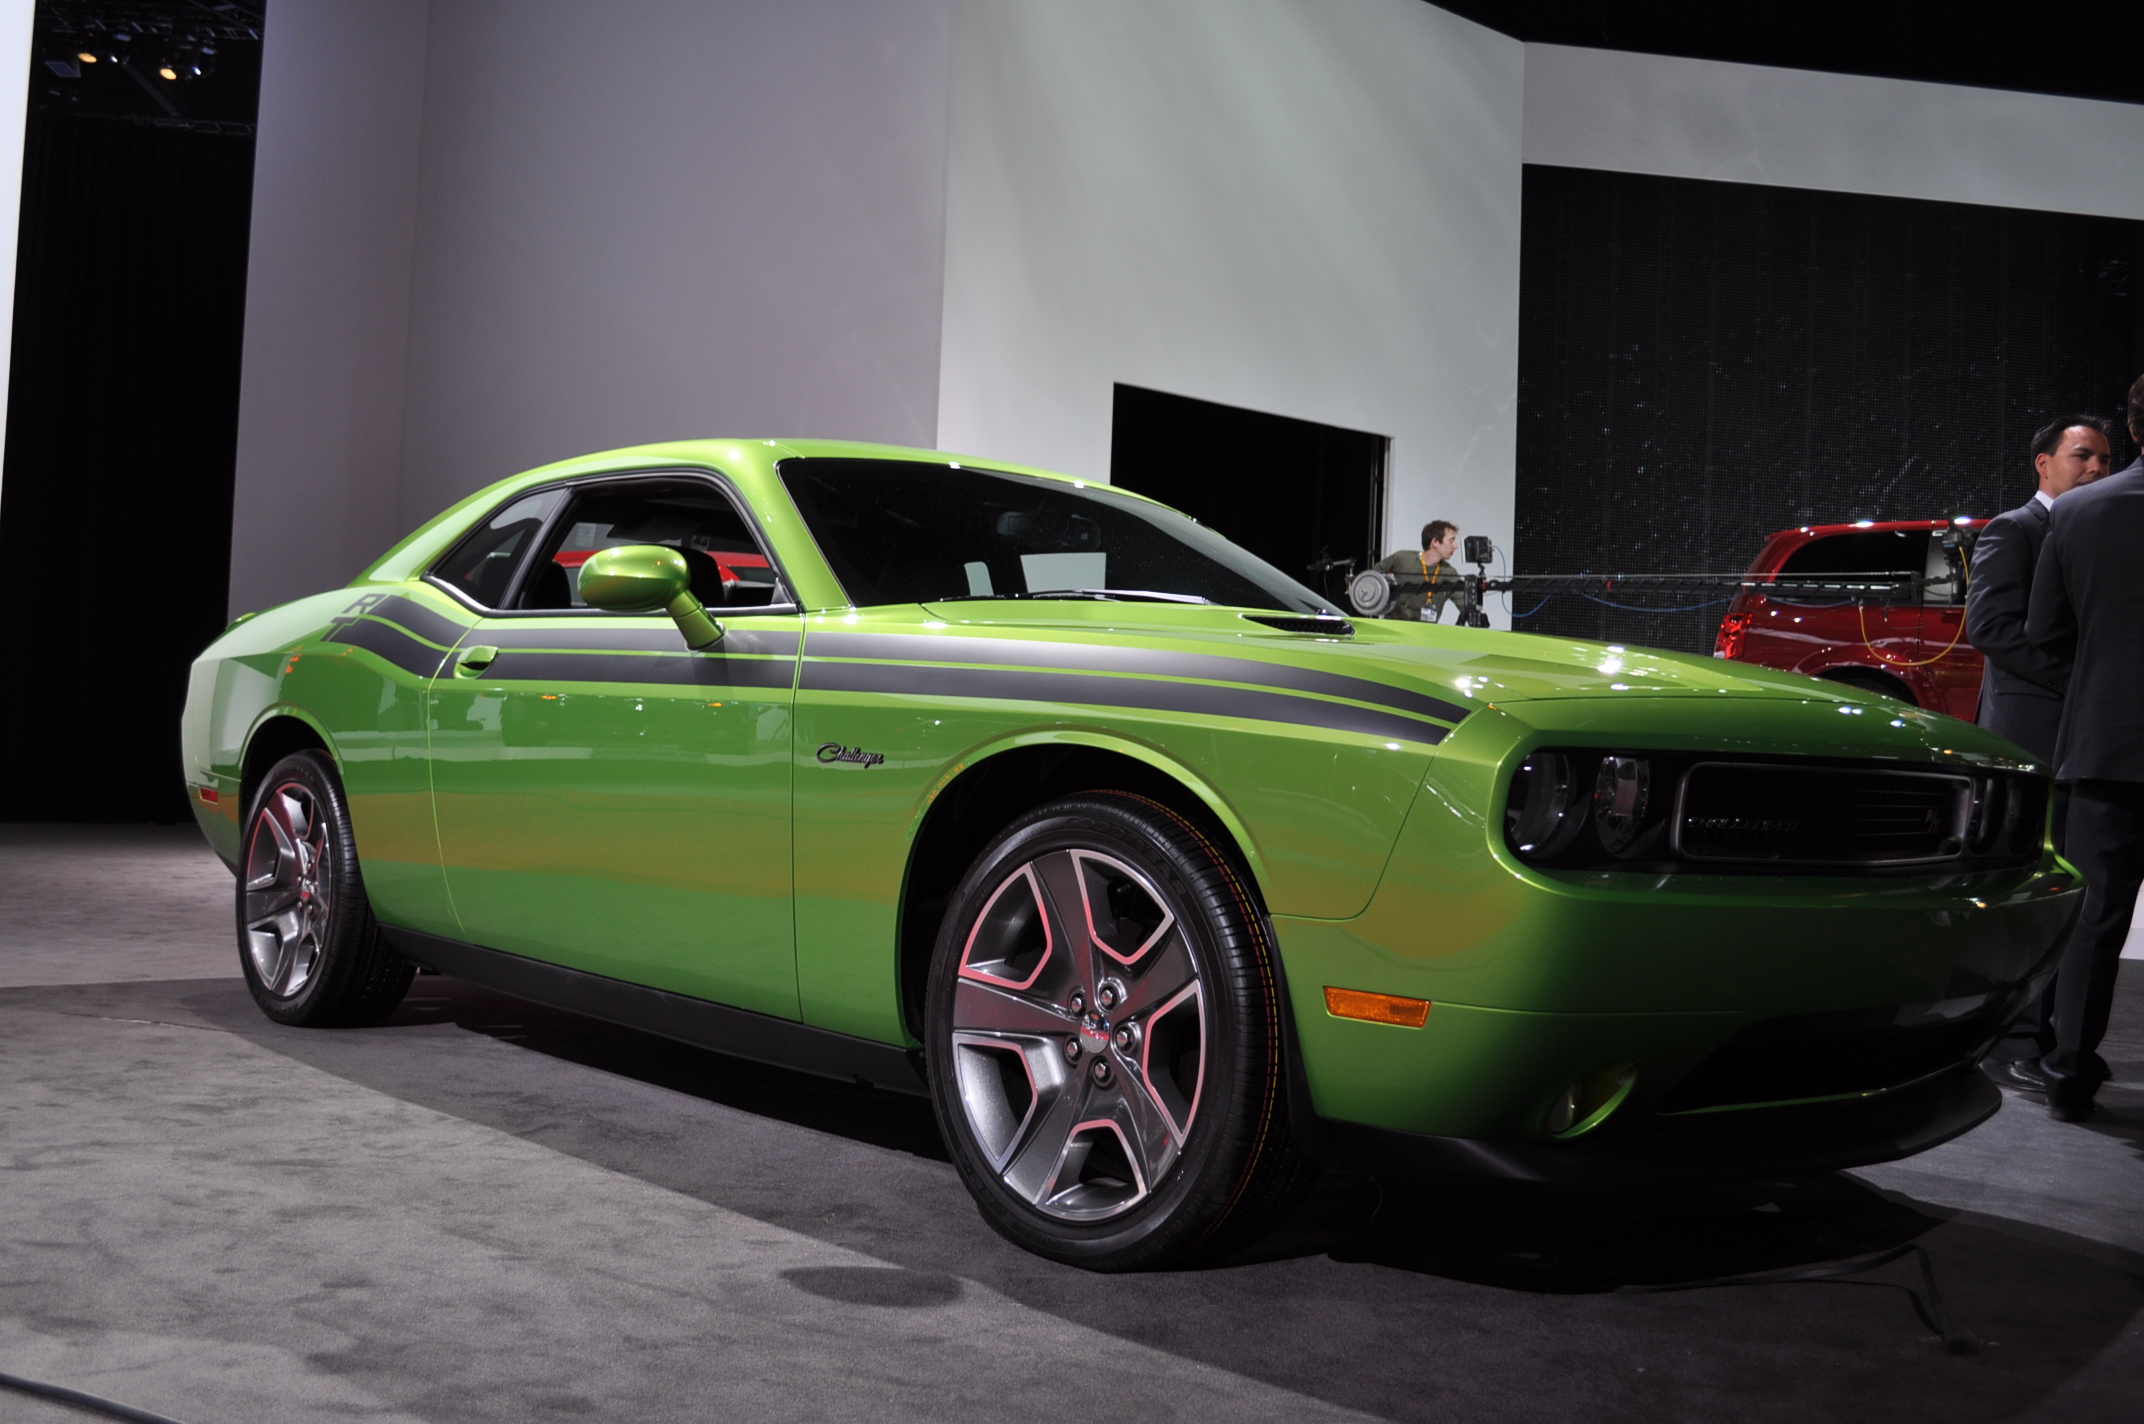 2011 Dodge Challenger R/T Green With Envy Live Photos: 2011 Chicago Auto Show